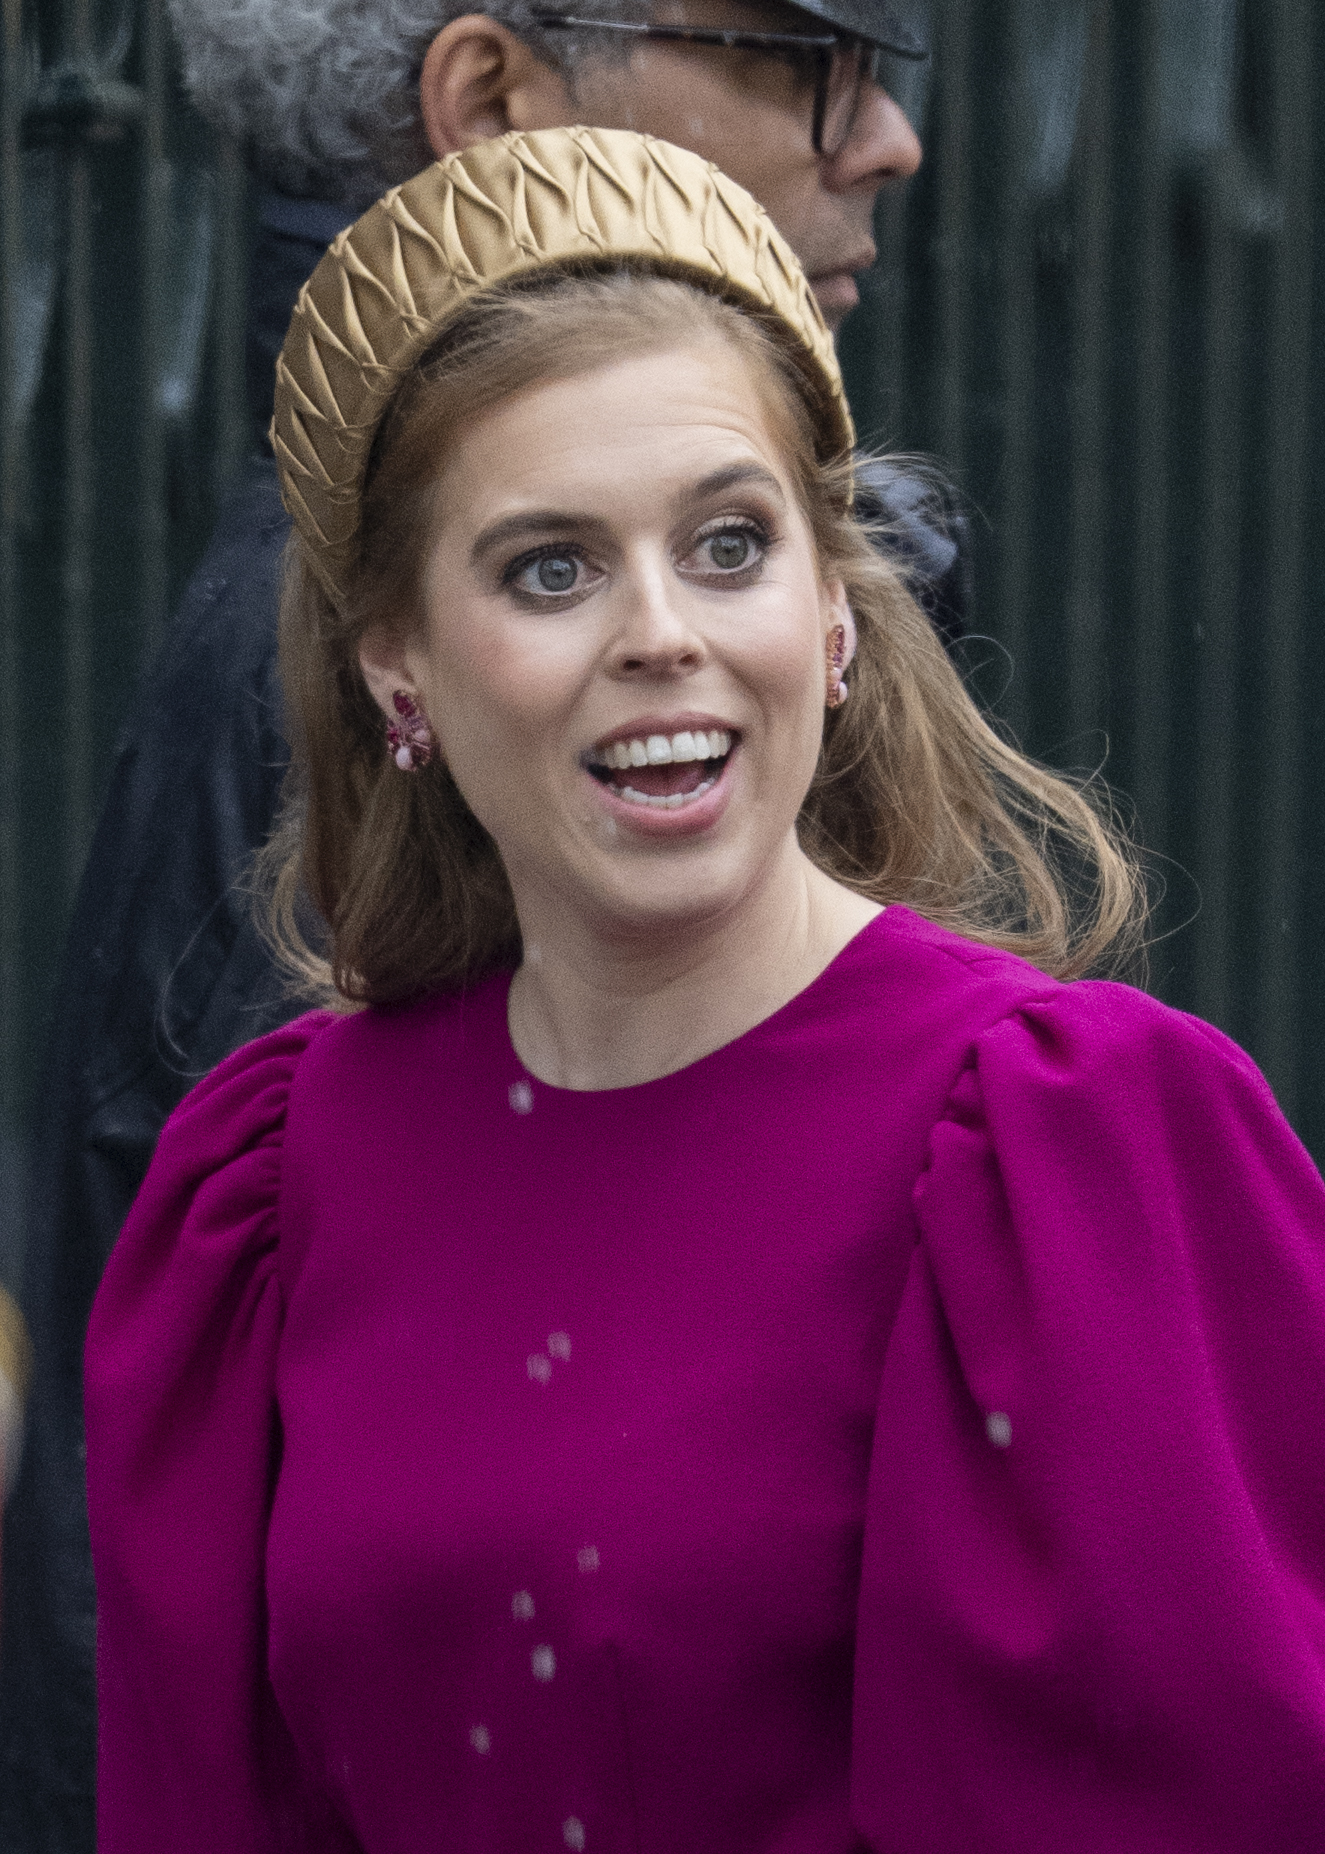 Princess Beatrice attends the Coronation of King Charles III and Queen Camilla on May 6, 2023, at Westminster Abbey in London, England. | Source: Getty Images